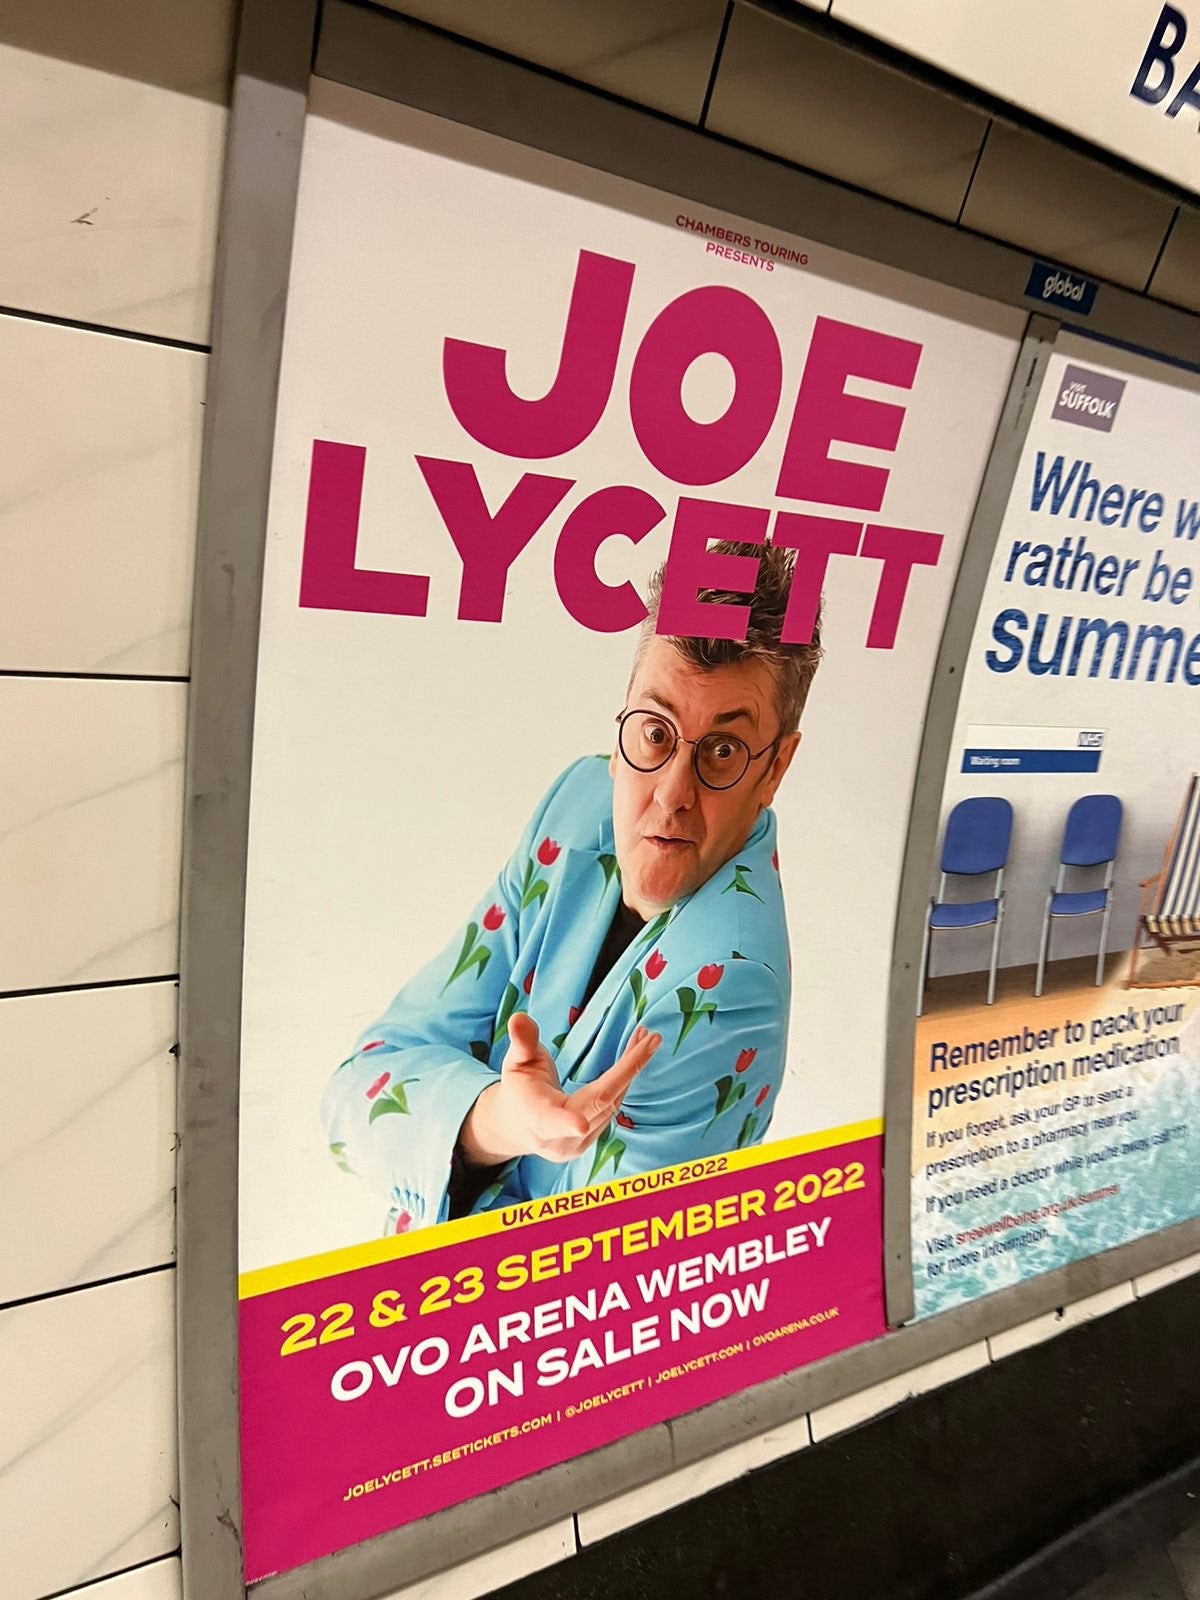 Lycett’s misleading tour poster